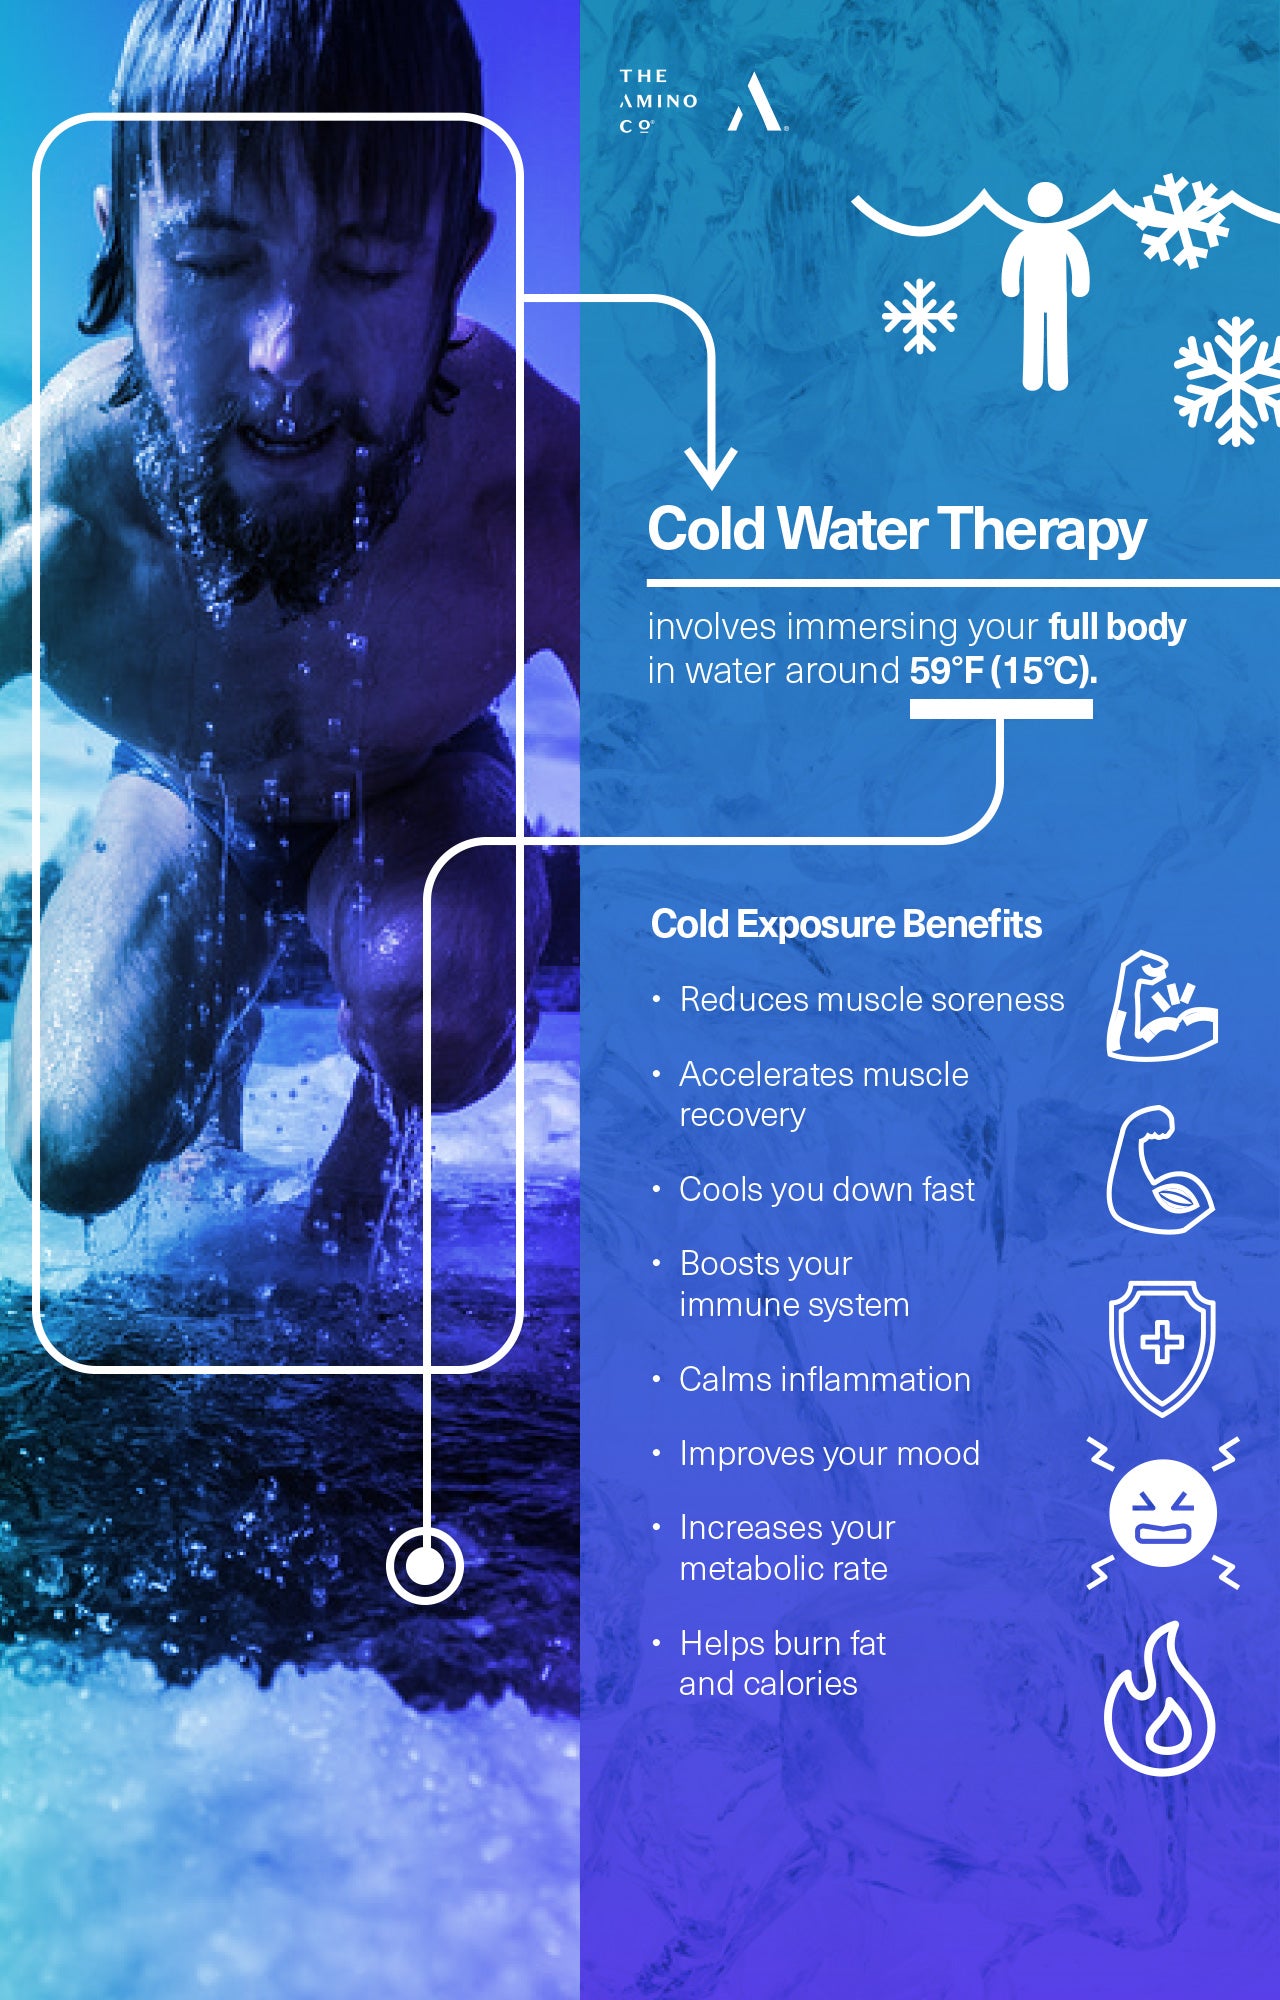 What you should know about cold-water therapy